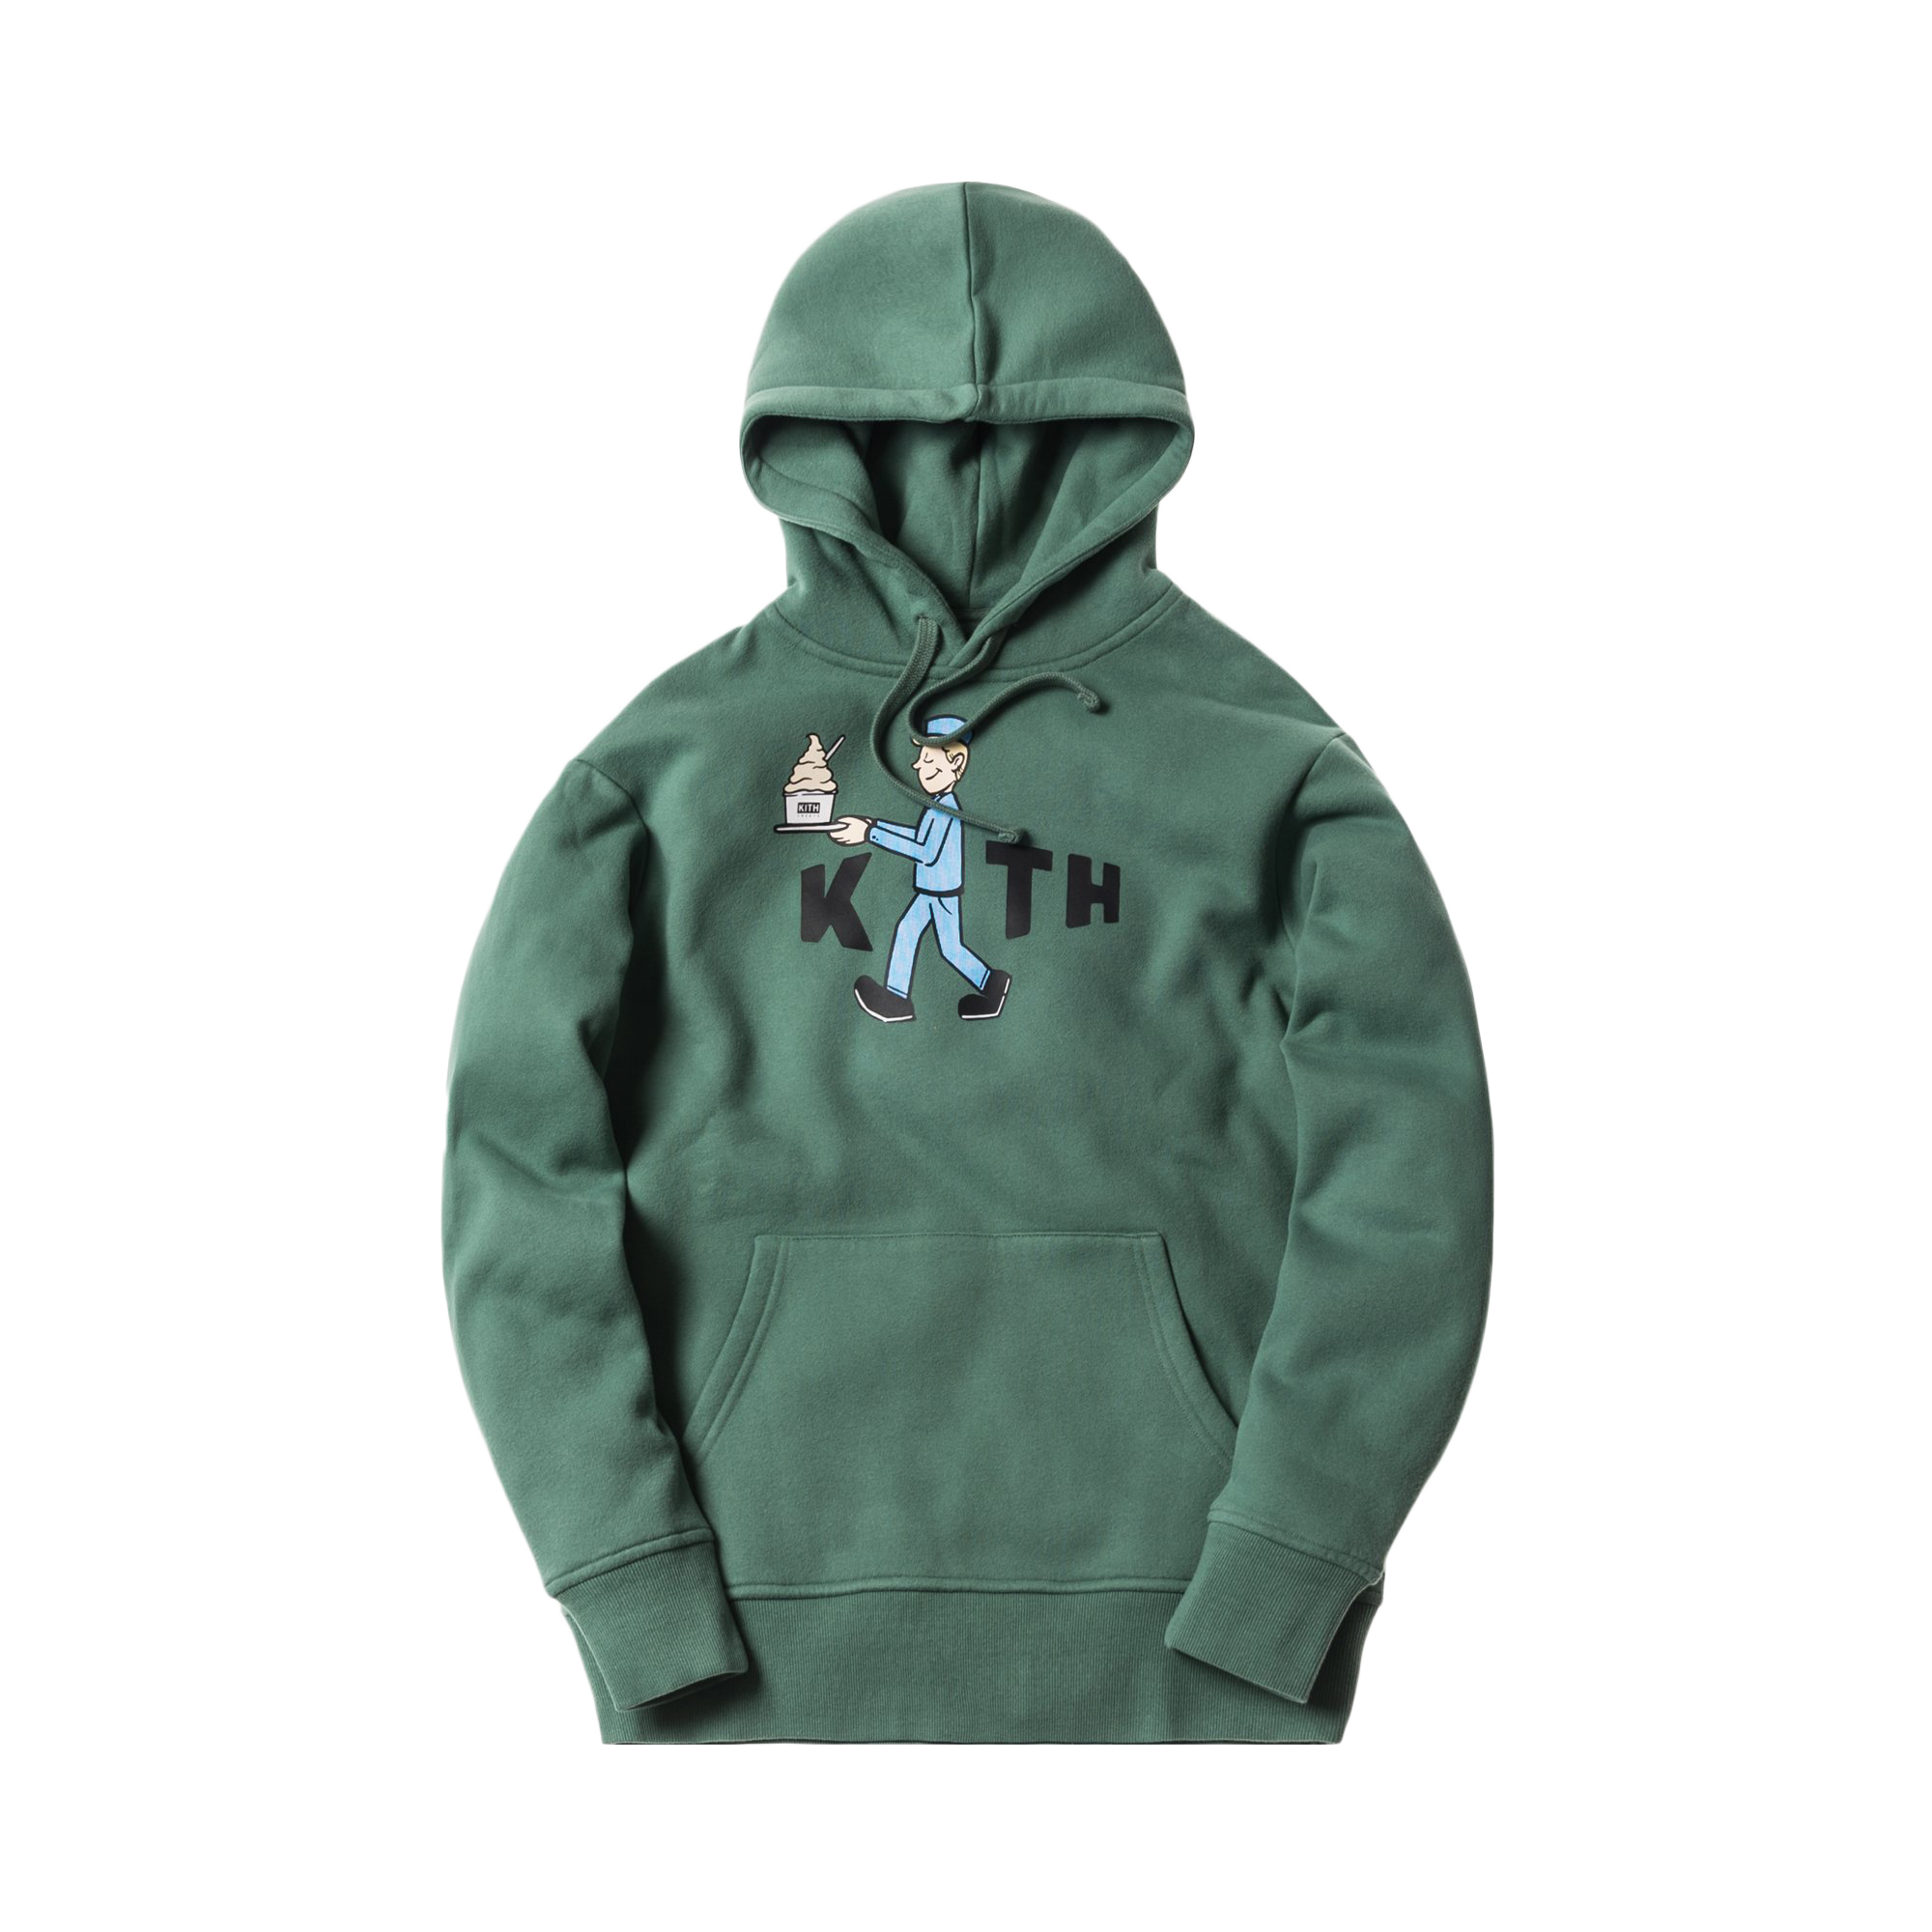 KITH TREATS DELIVERED HOODIE プリントパーカー - パーカーパーカー